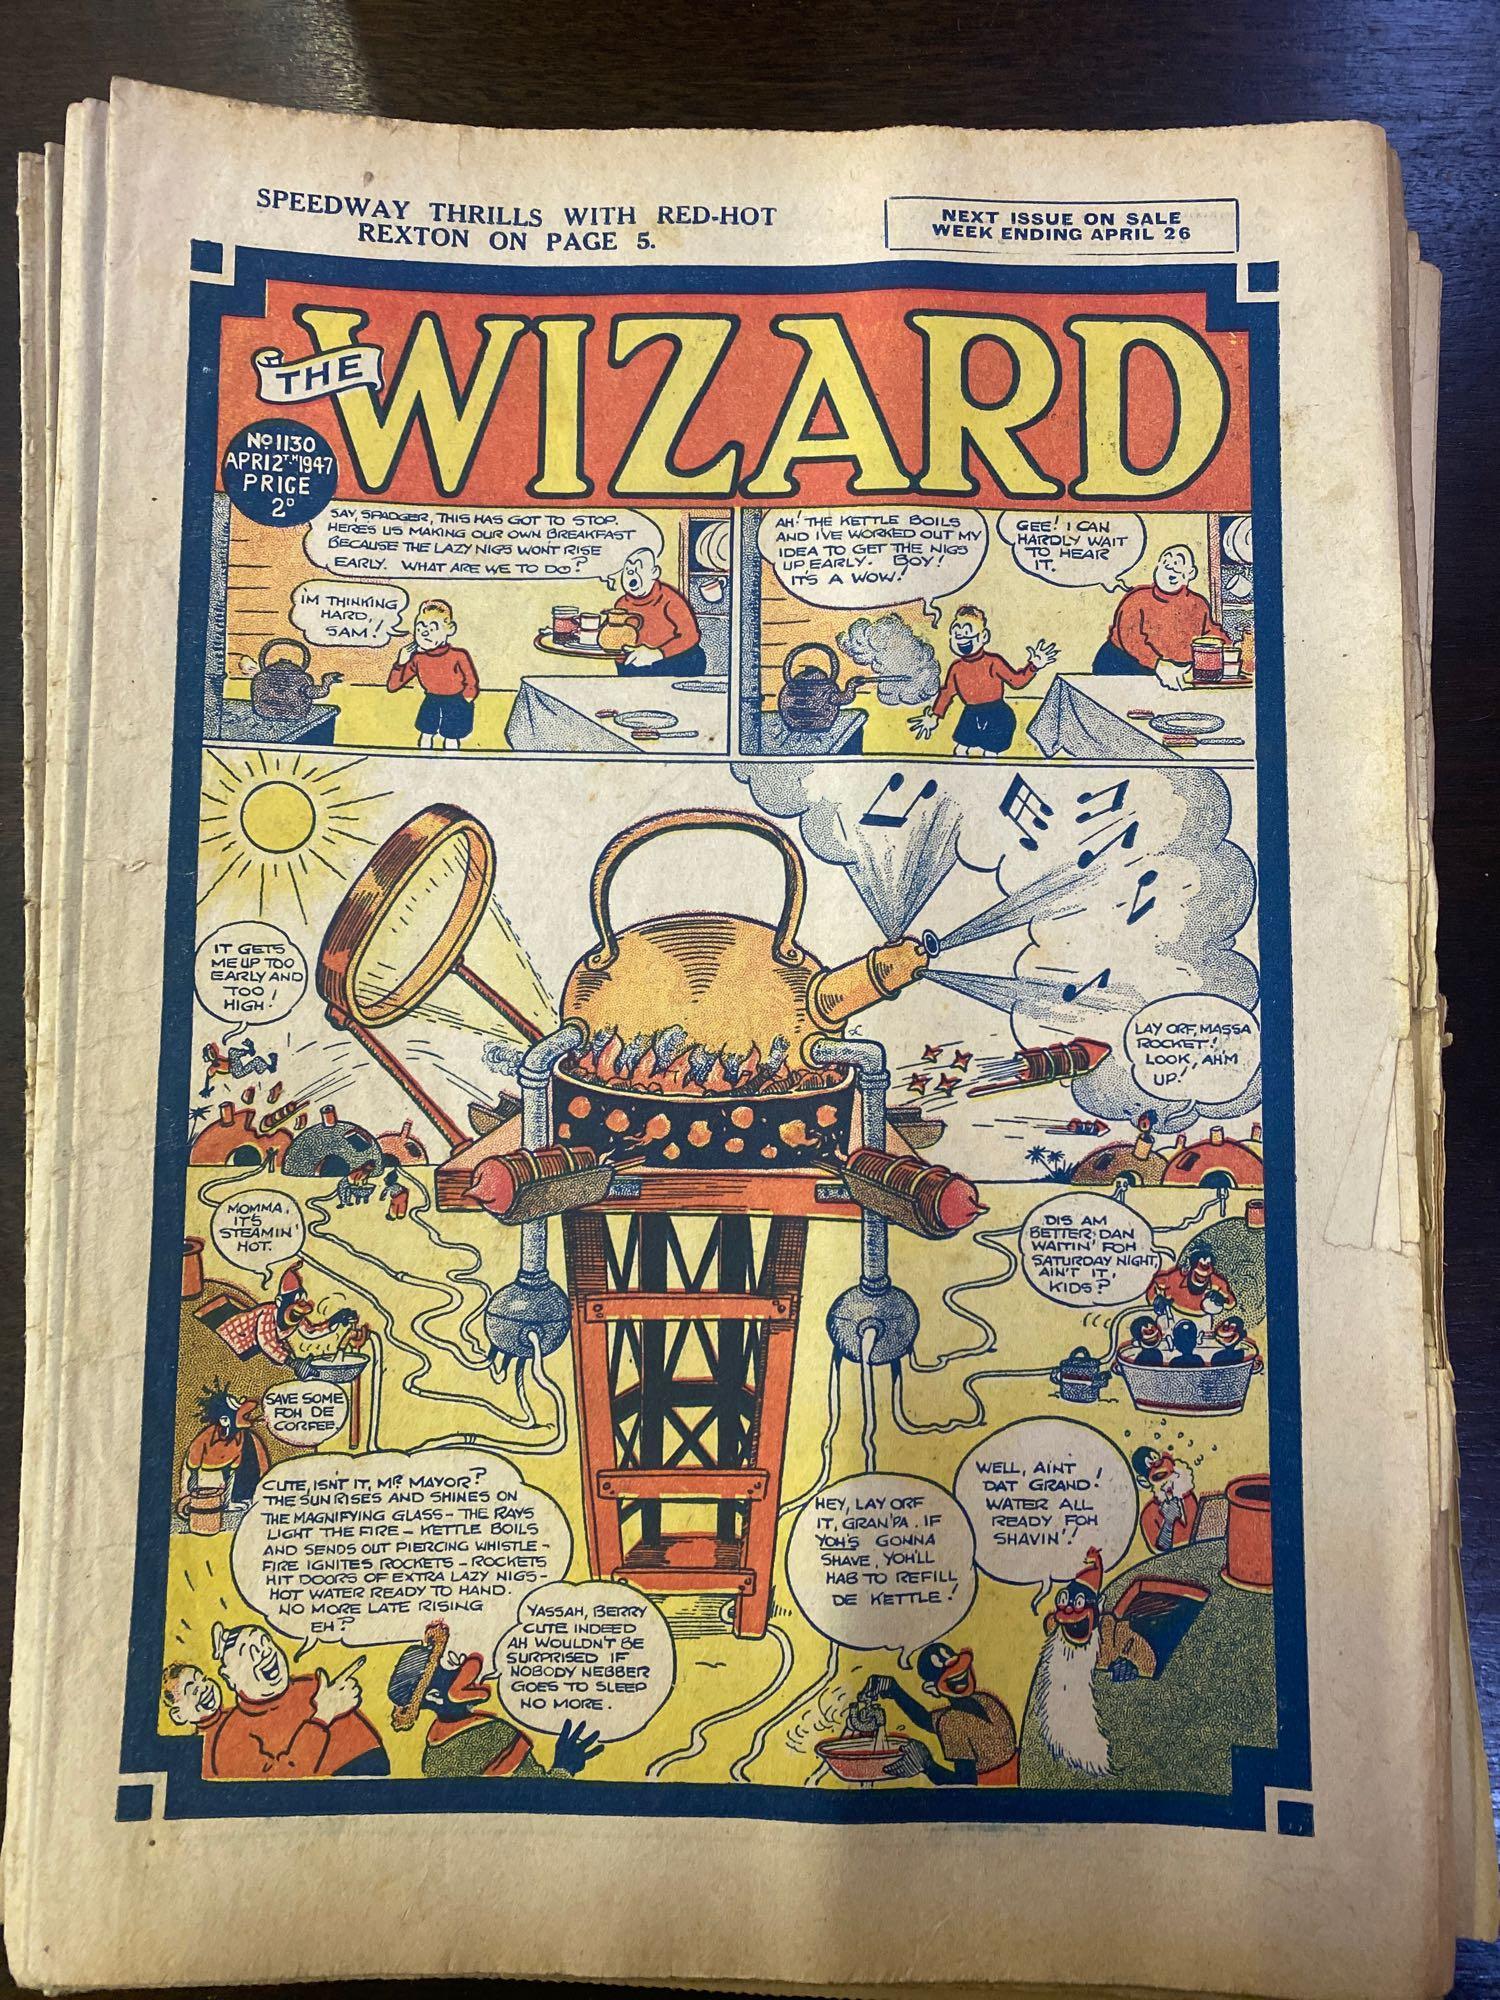 A quantity of vintage comics and childrens newspapers - Image 21 of 124